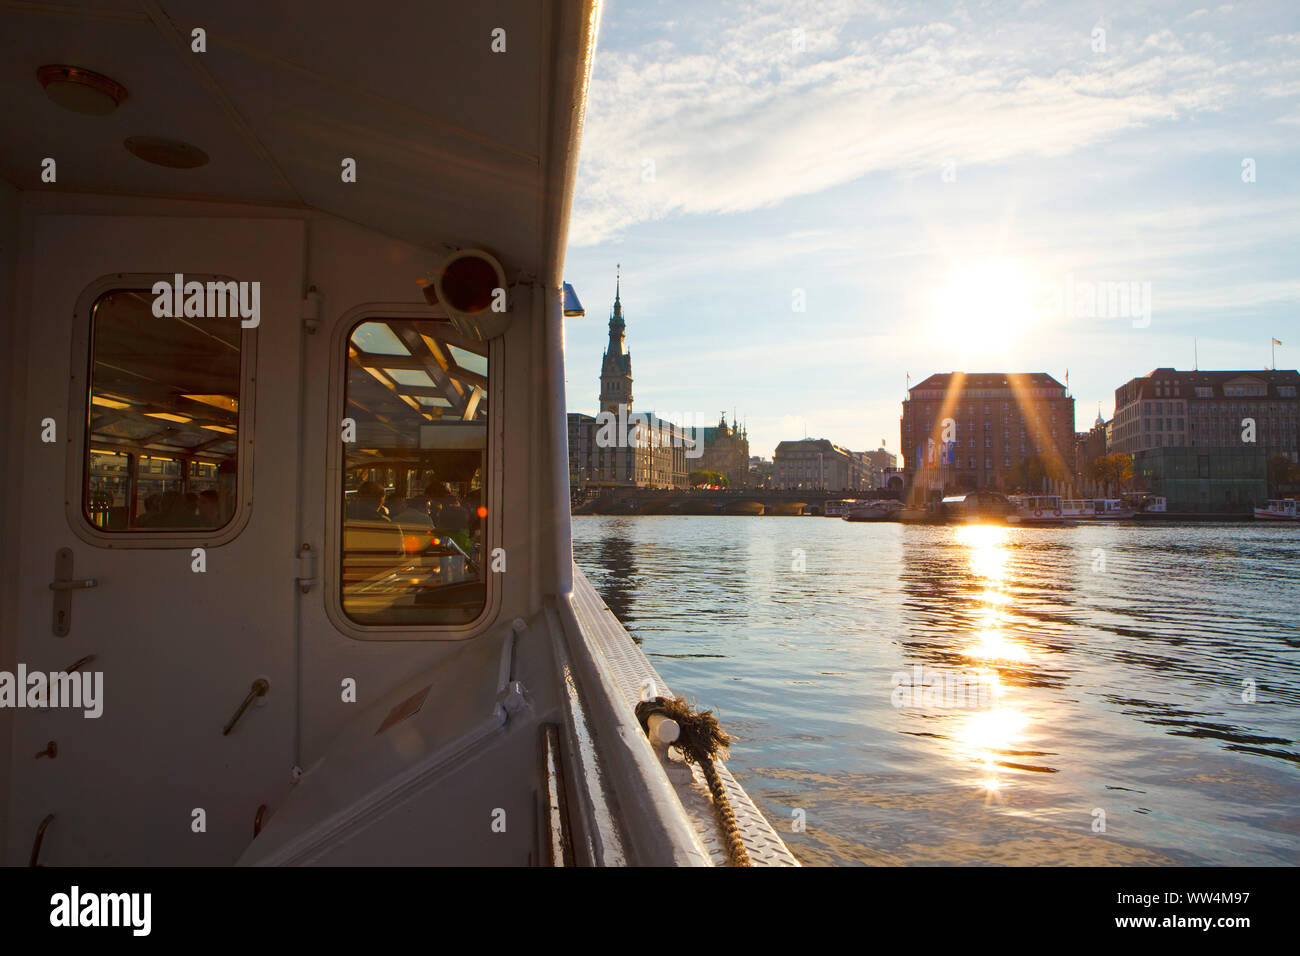 Launch boat on the Inner Alster. Canal trip Hamburg. Stock Photo